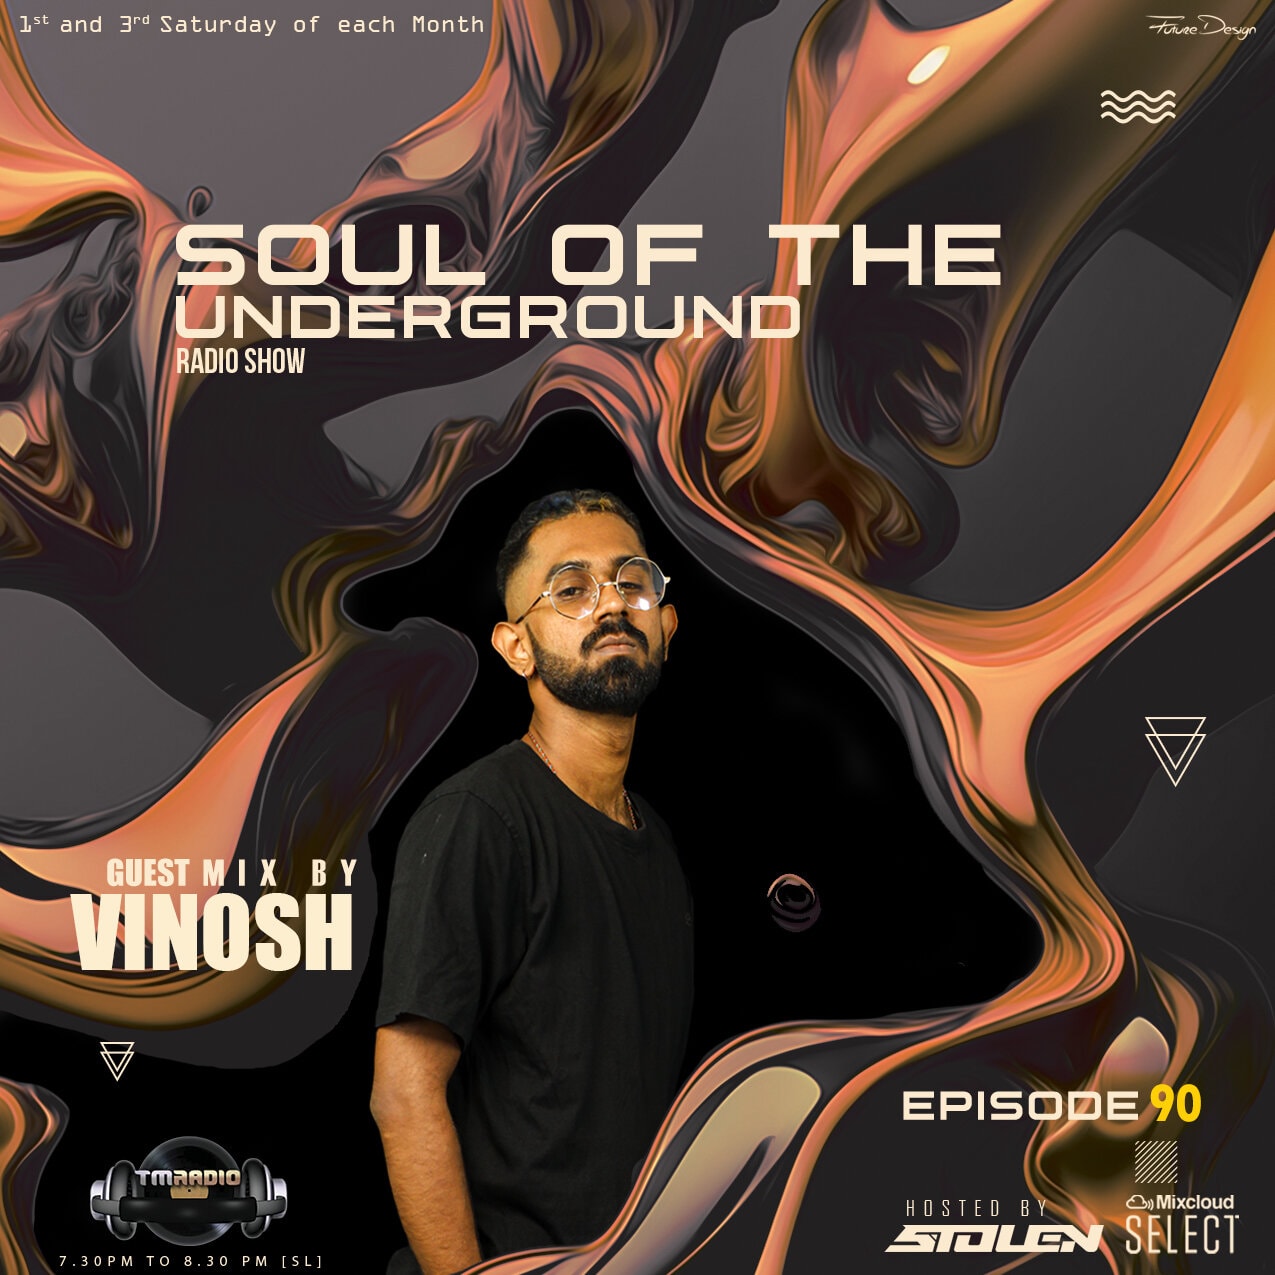 Episode EP90 guest Mix by Vinosh (from February 3rd)